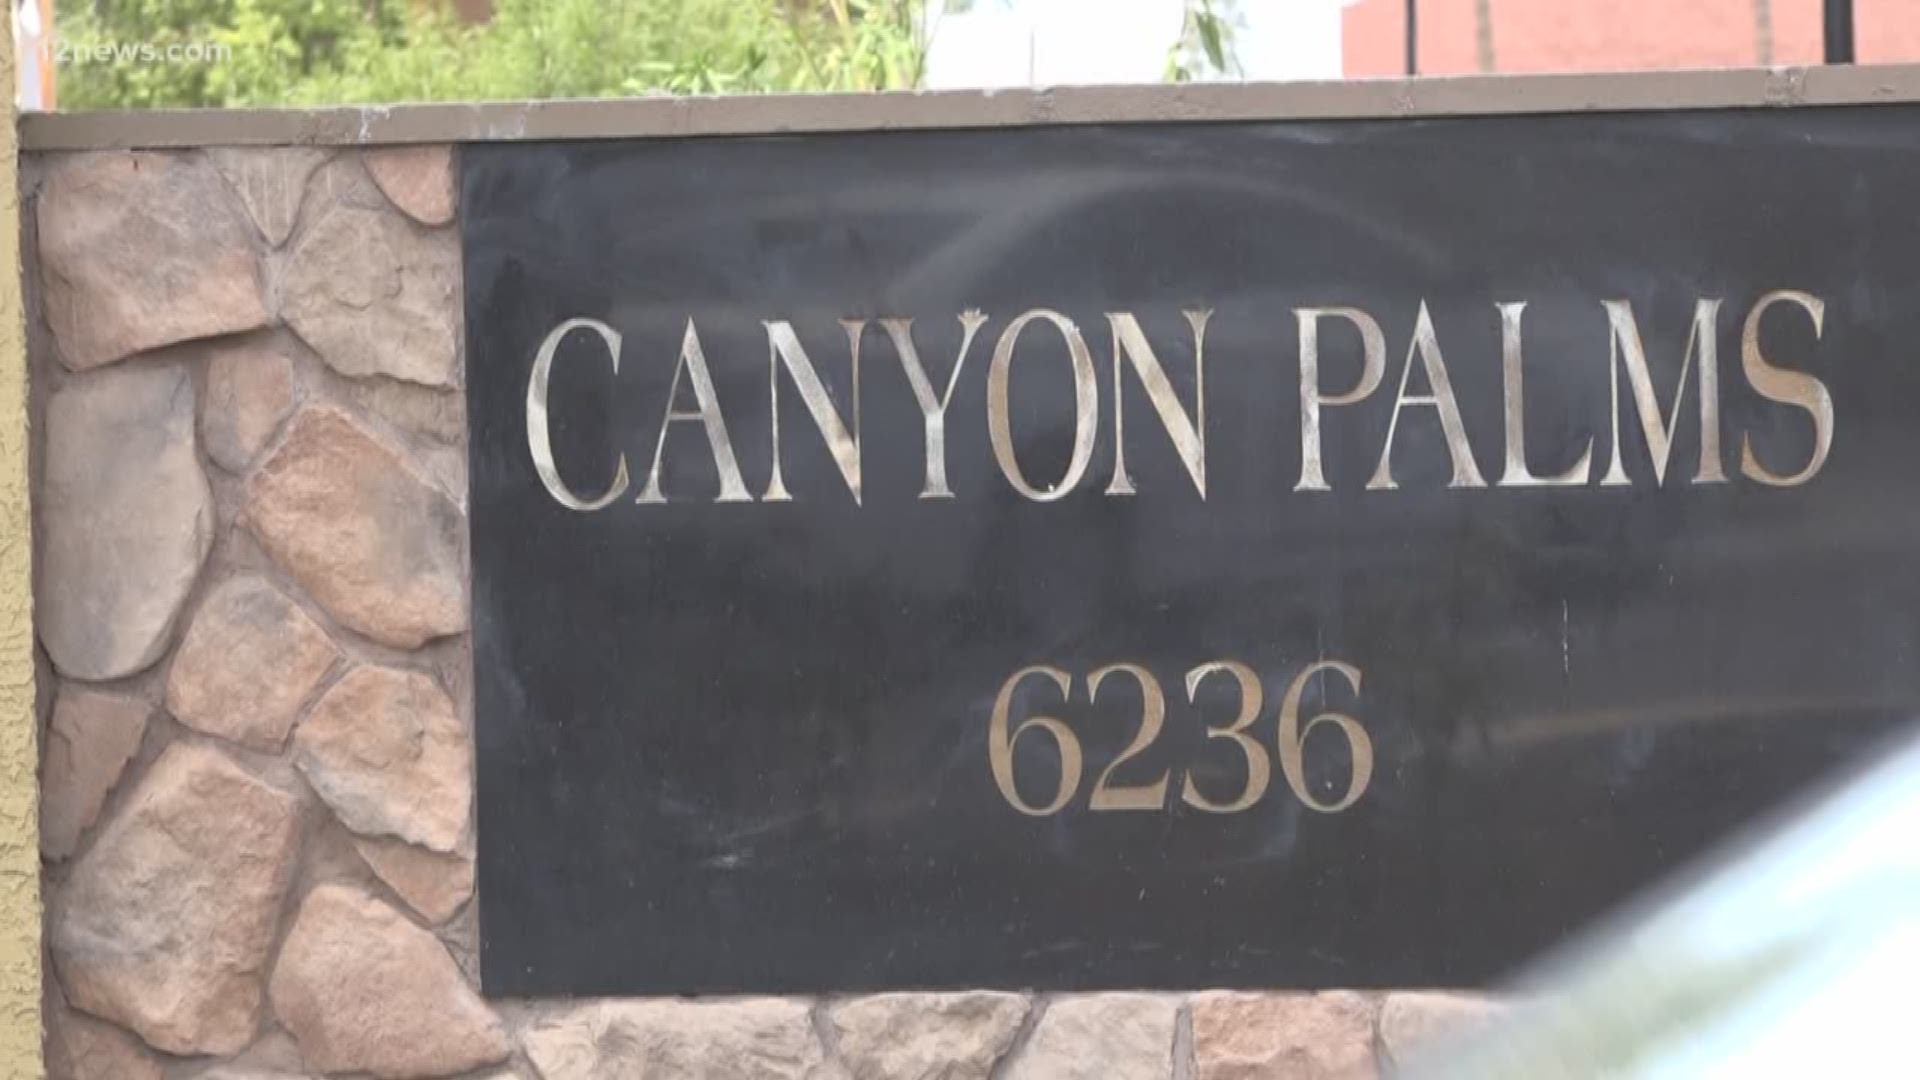 A Valley apartment complex has left residents with no AC during the hottest part of the summer. One of the residents says this isn't the first time it's happened either.